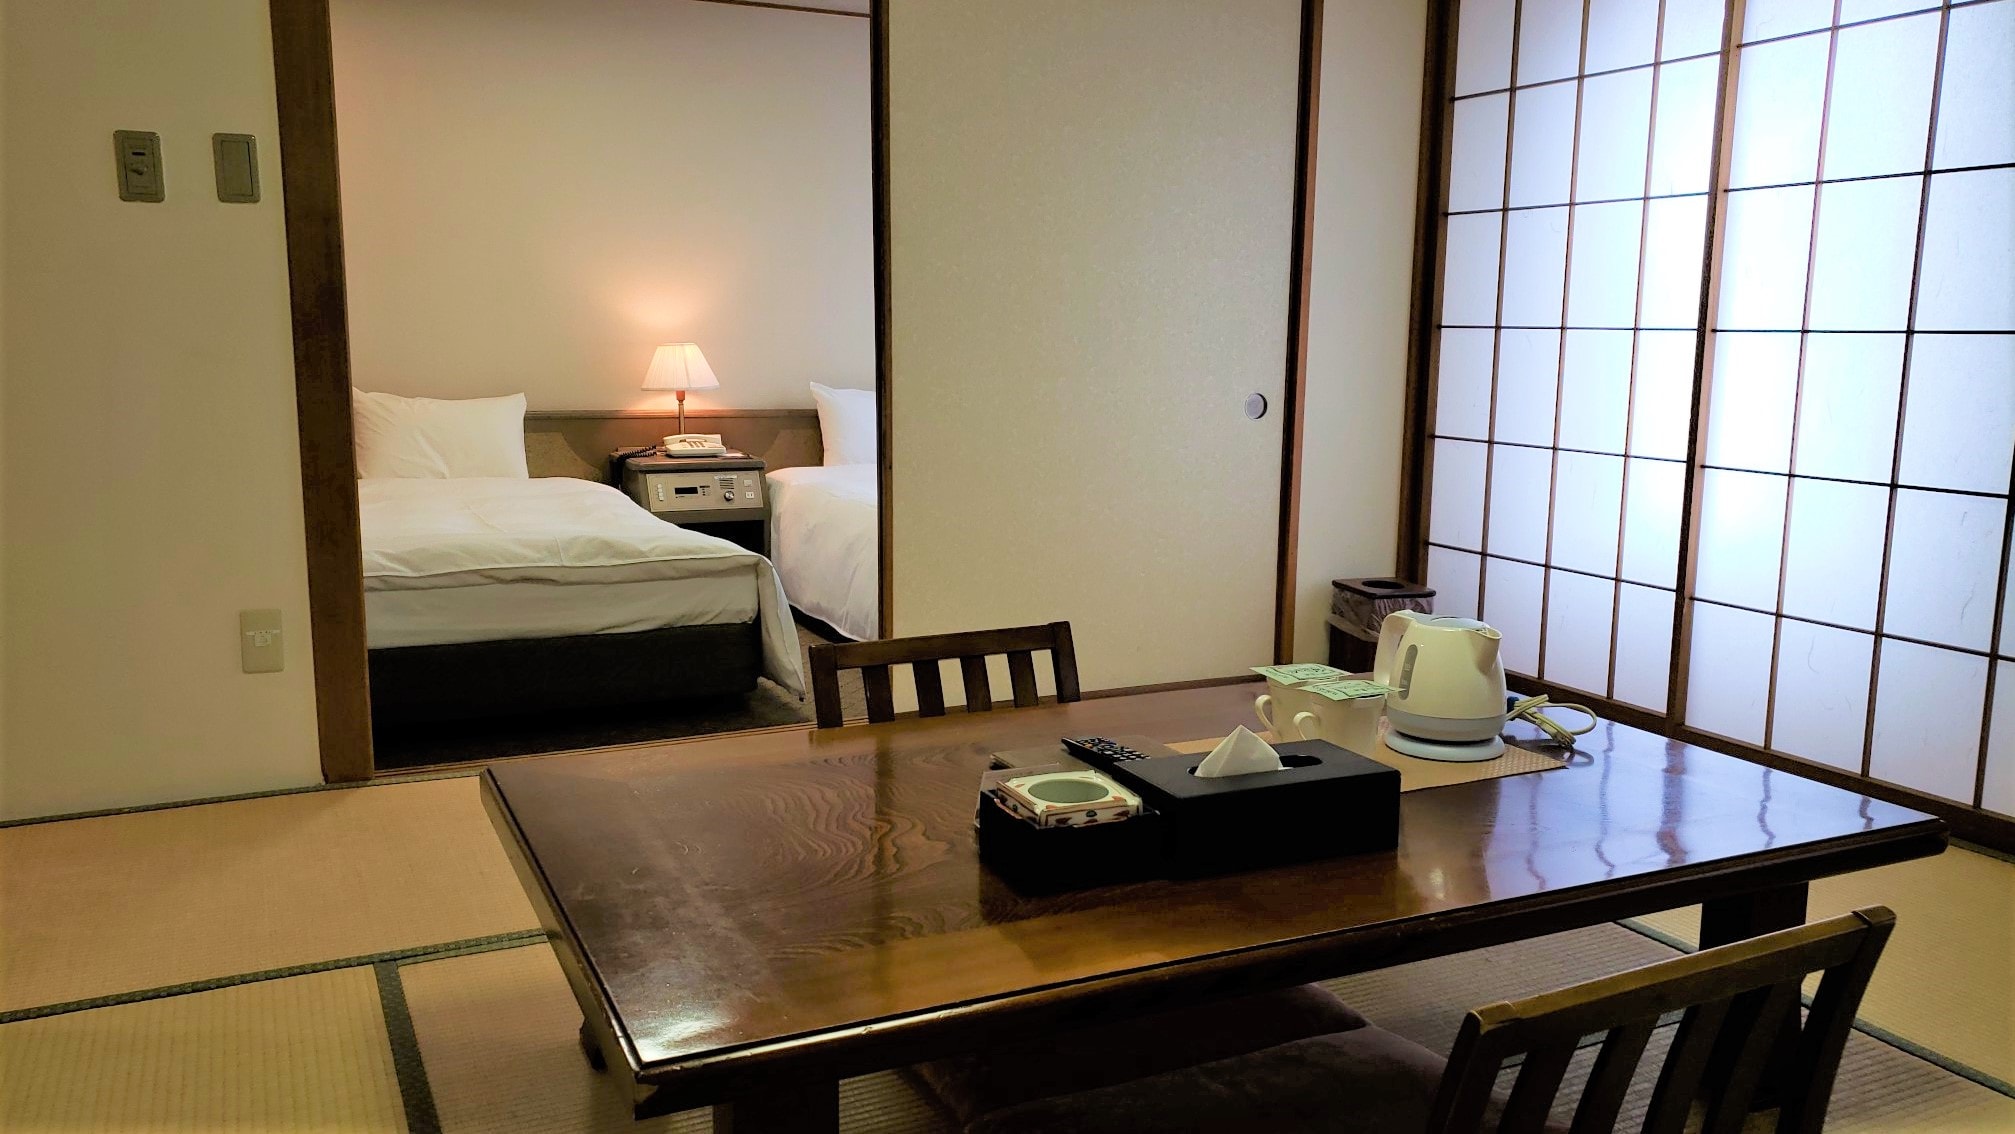 ◆ Japanese and Western rooms